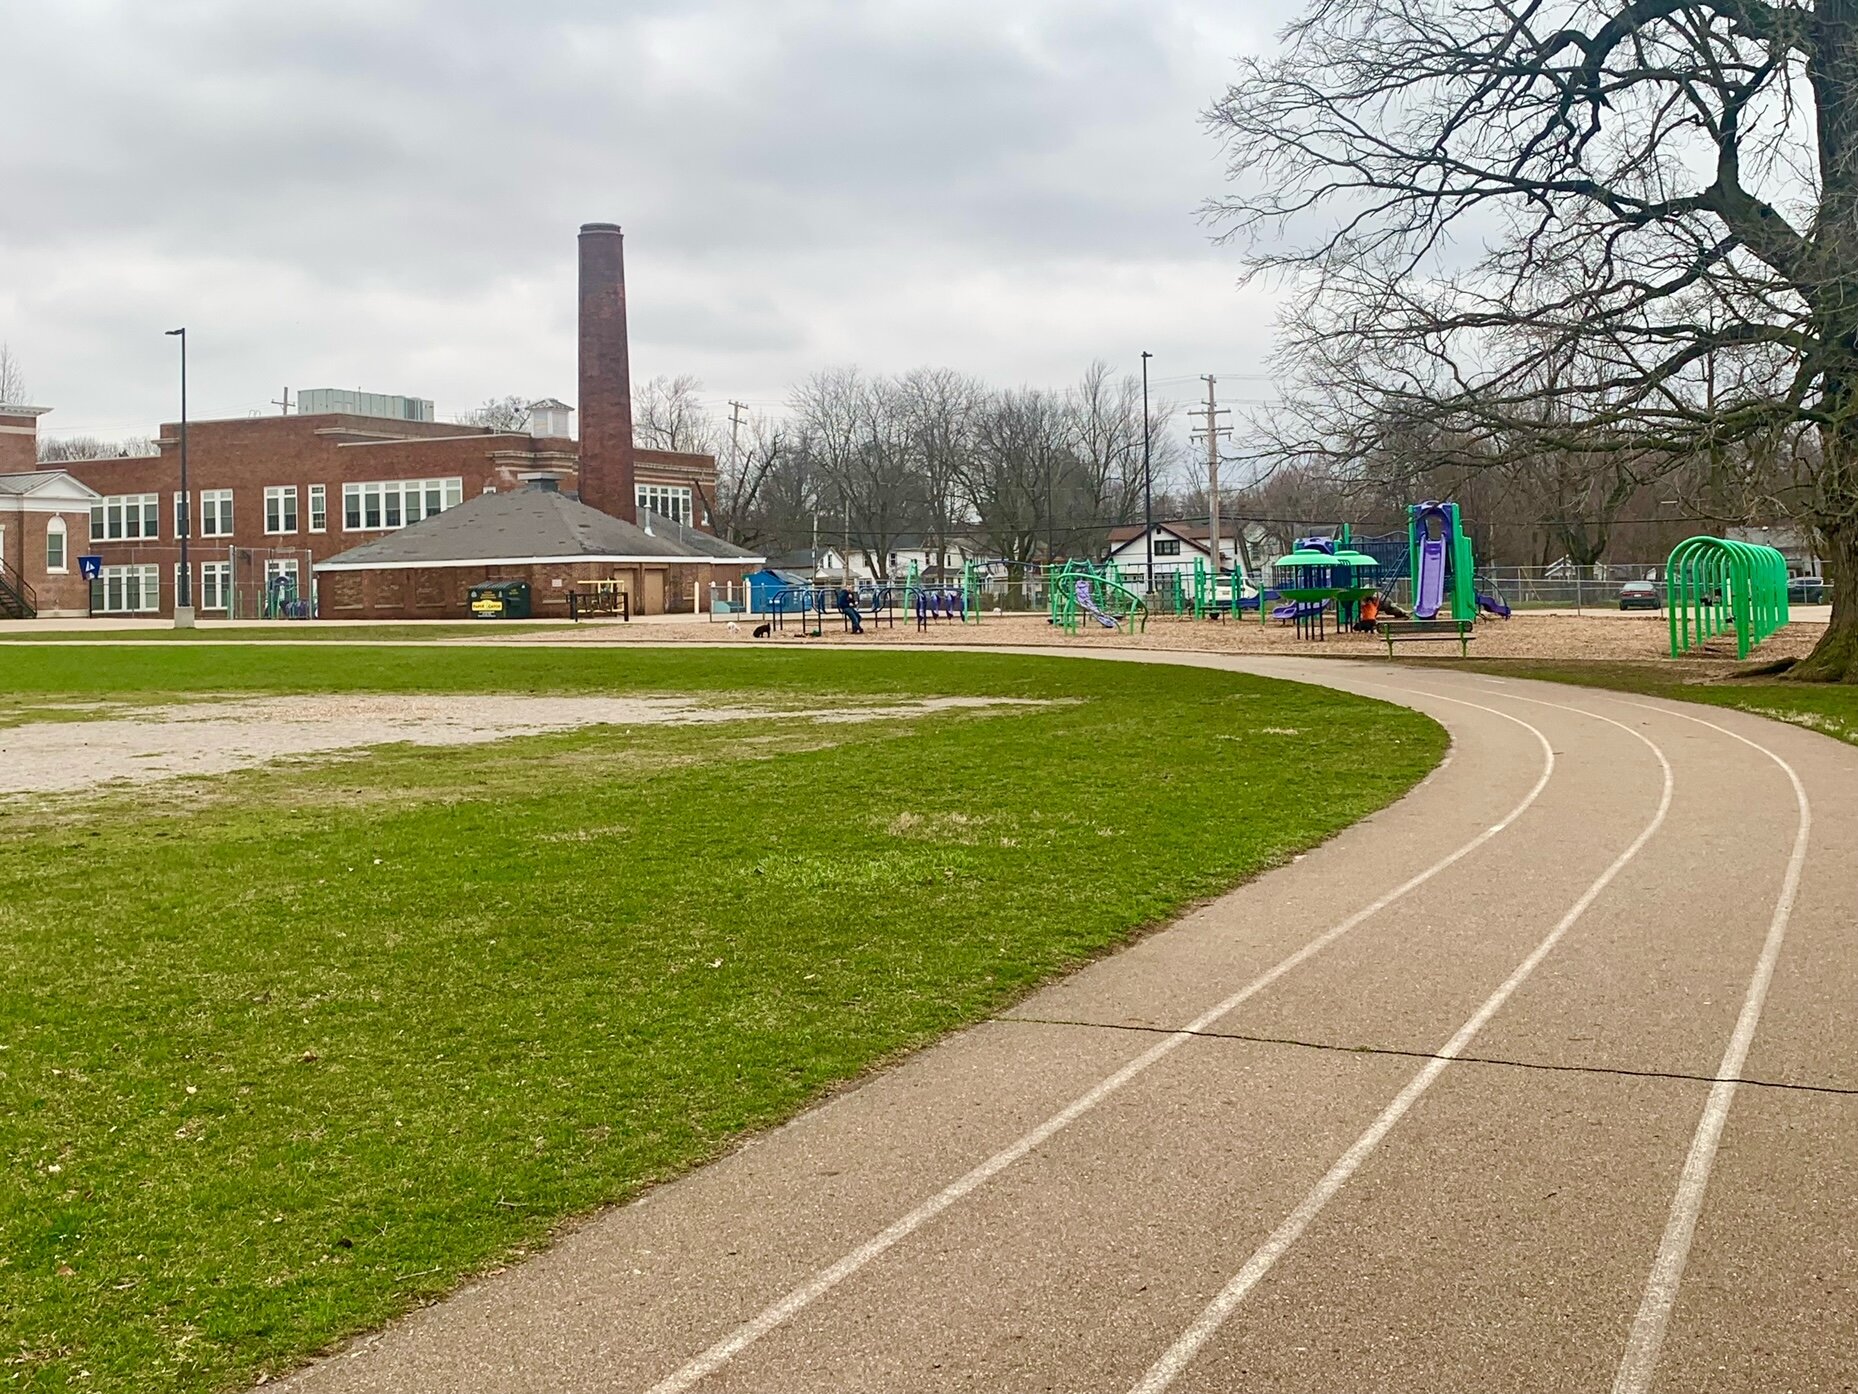 A new neighborhood plan for Stuart Neighborhood includes the idea of developing stronger connections between area residents and Woodward School for Technology & Research, shown here.